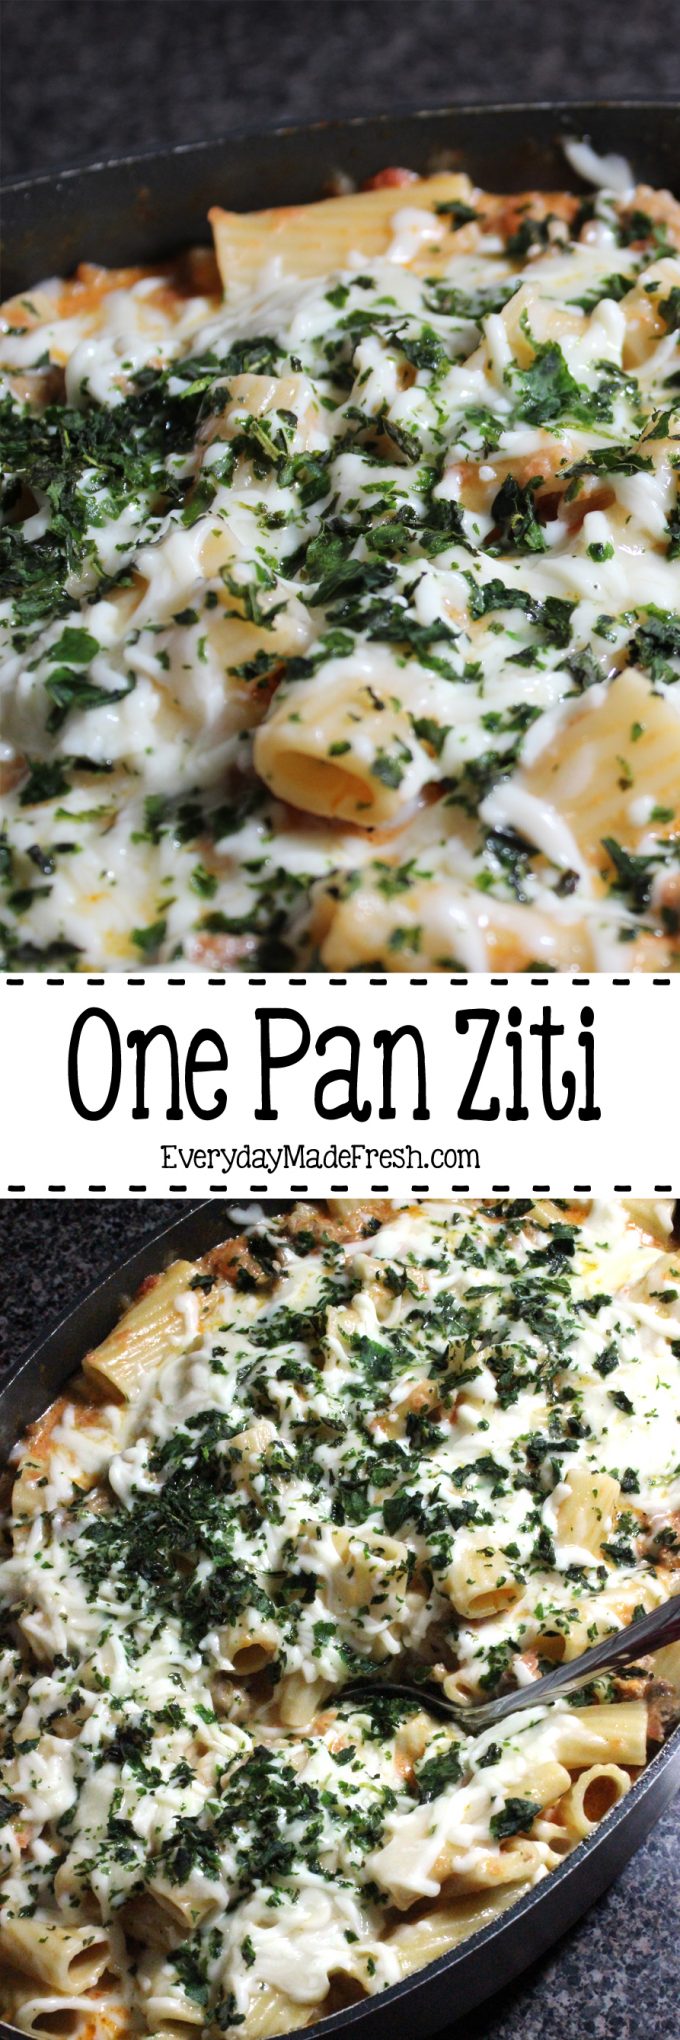 This One Pan Ziti is so tasty and so easy to make. It's one of our favorites! | EverydayMadeFresh.com